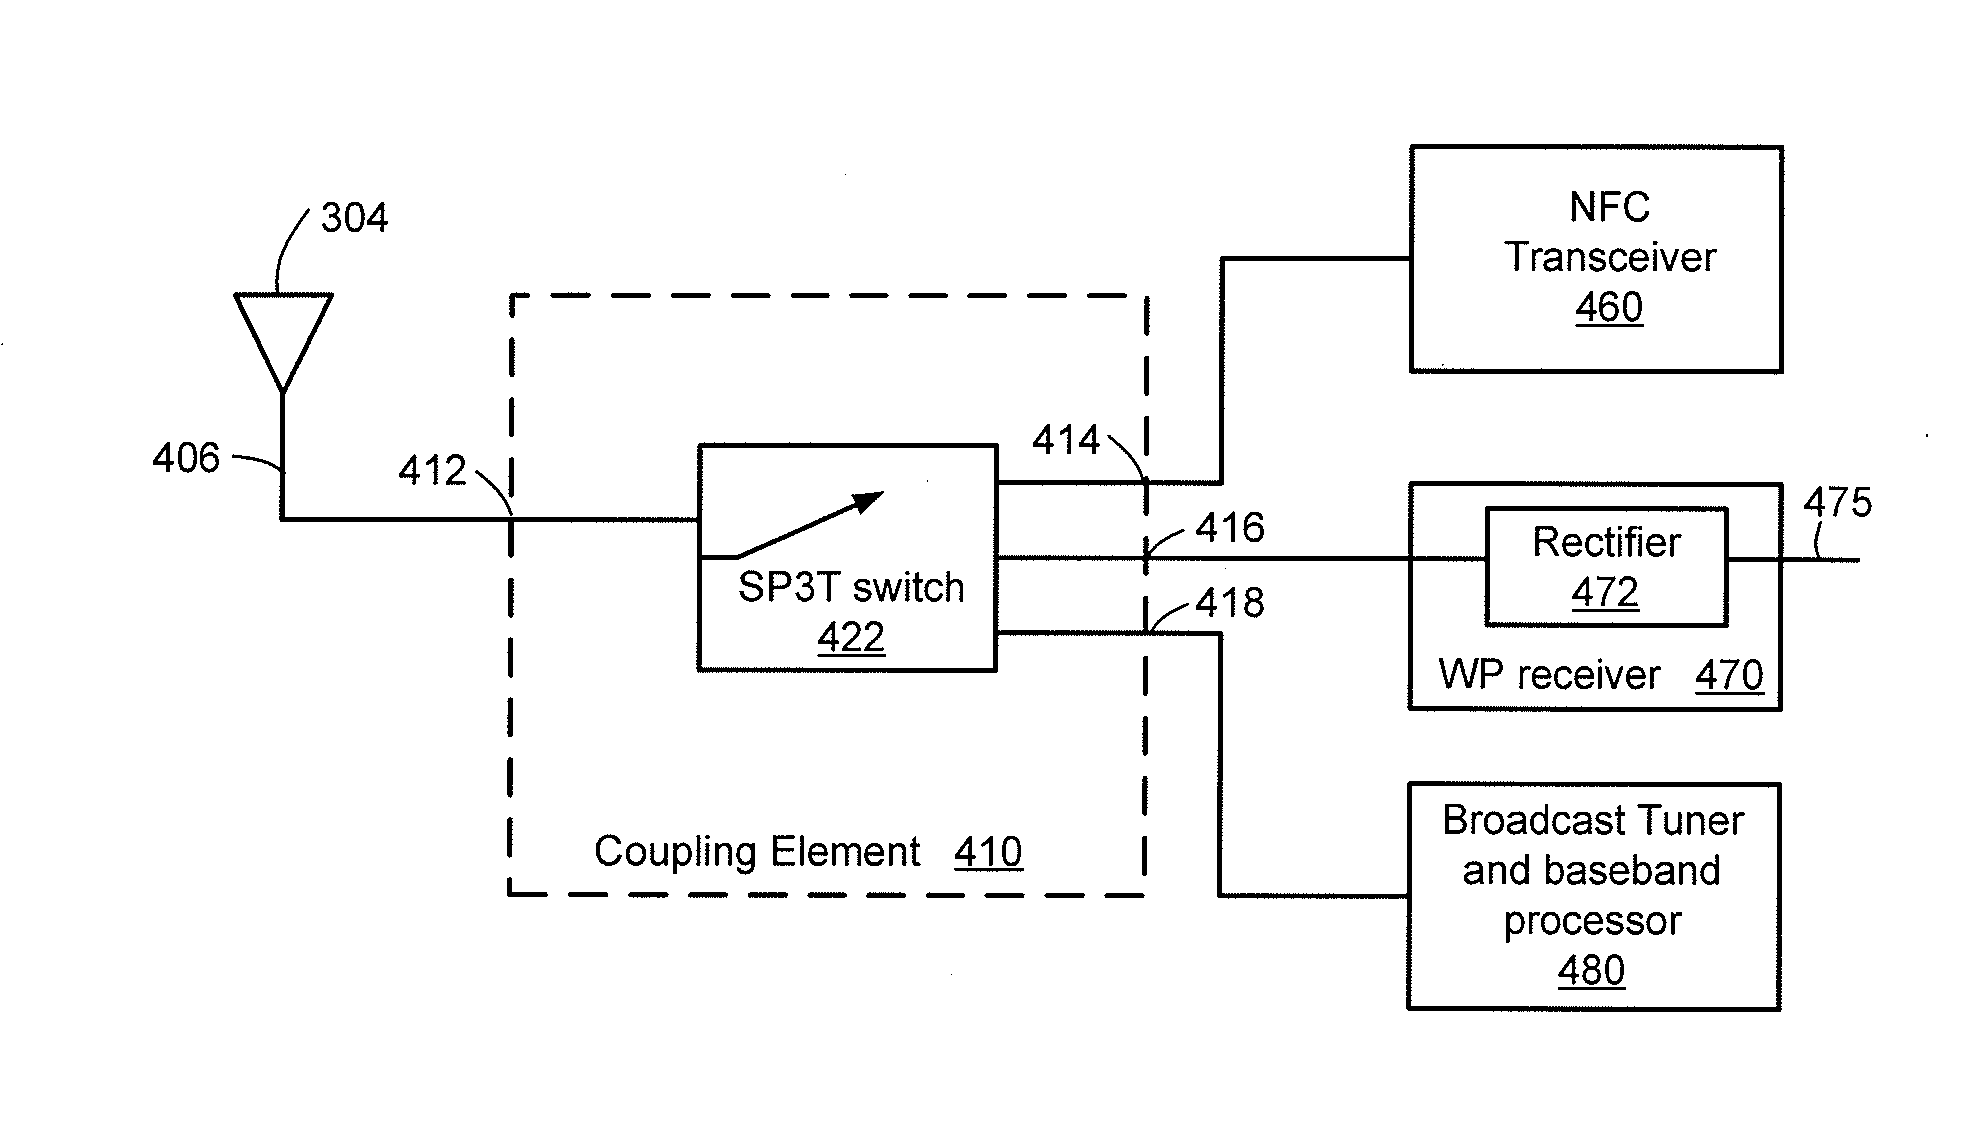 Antenna sharing for wirelessly powered devices